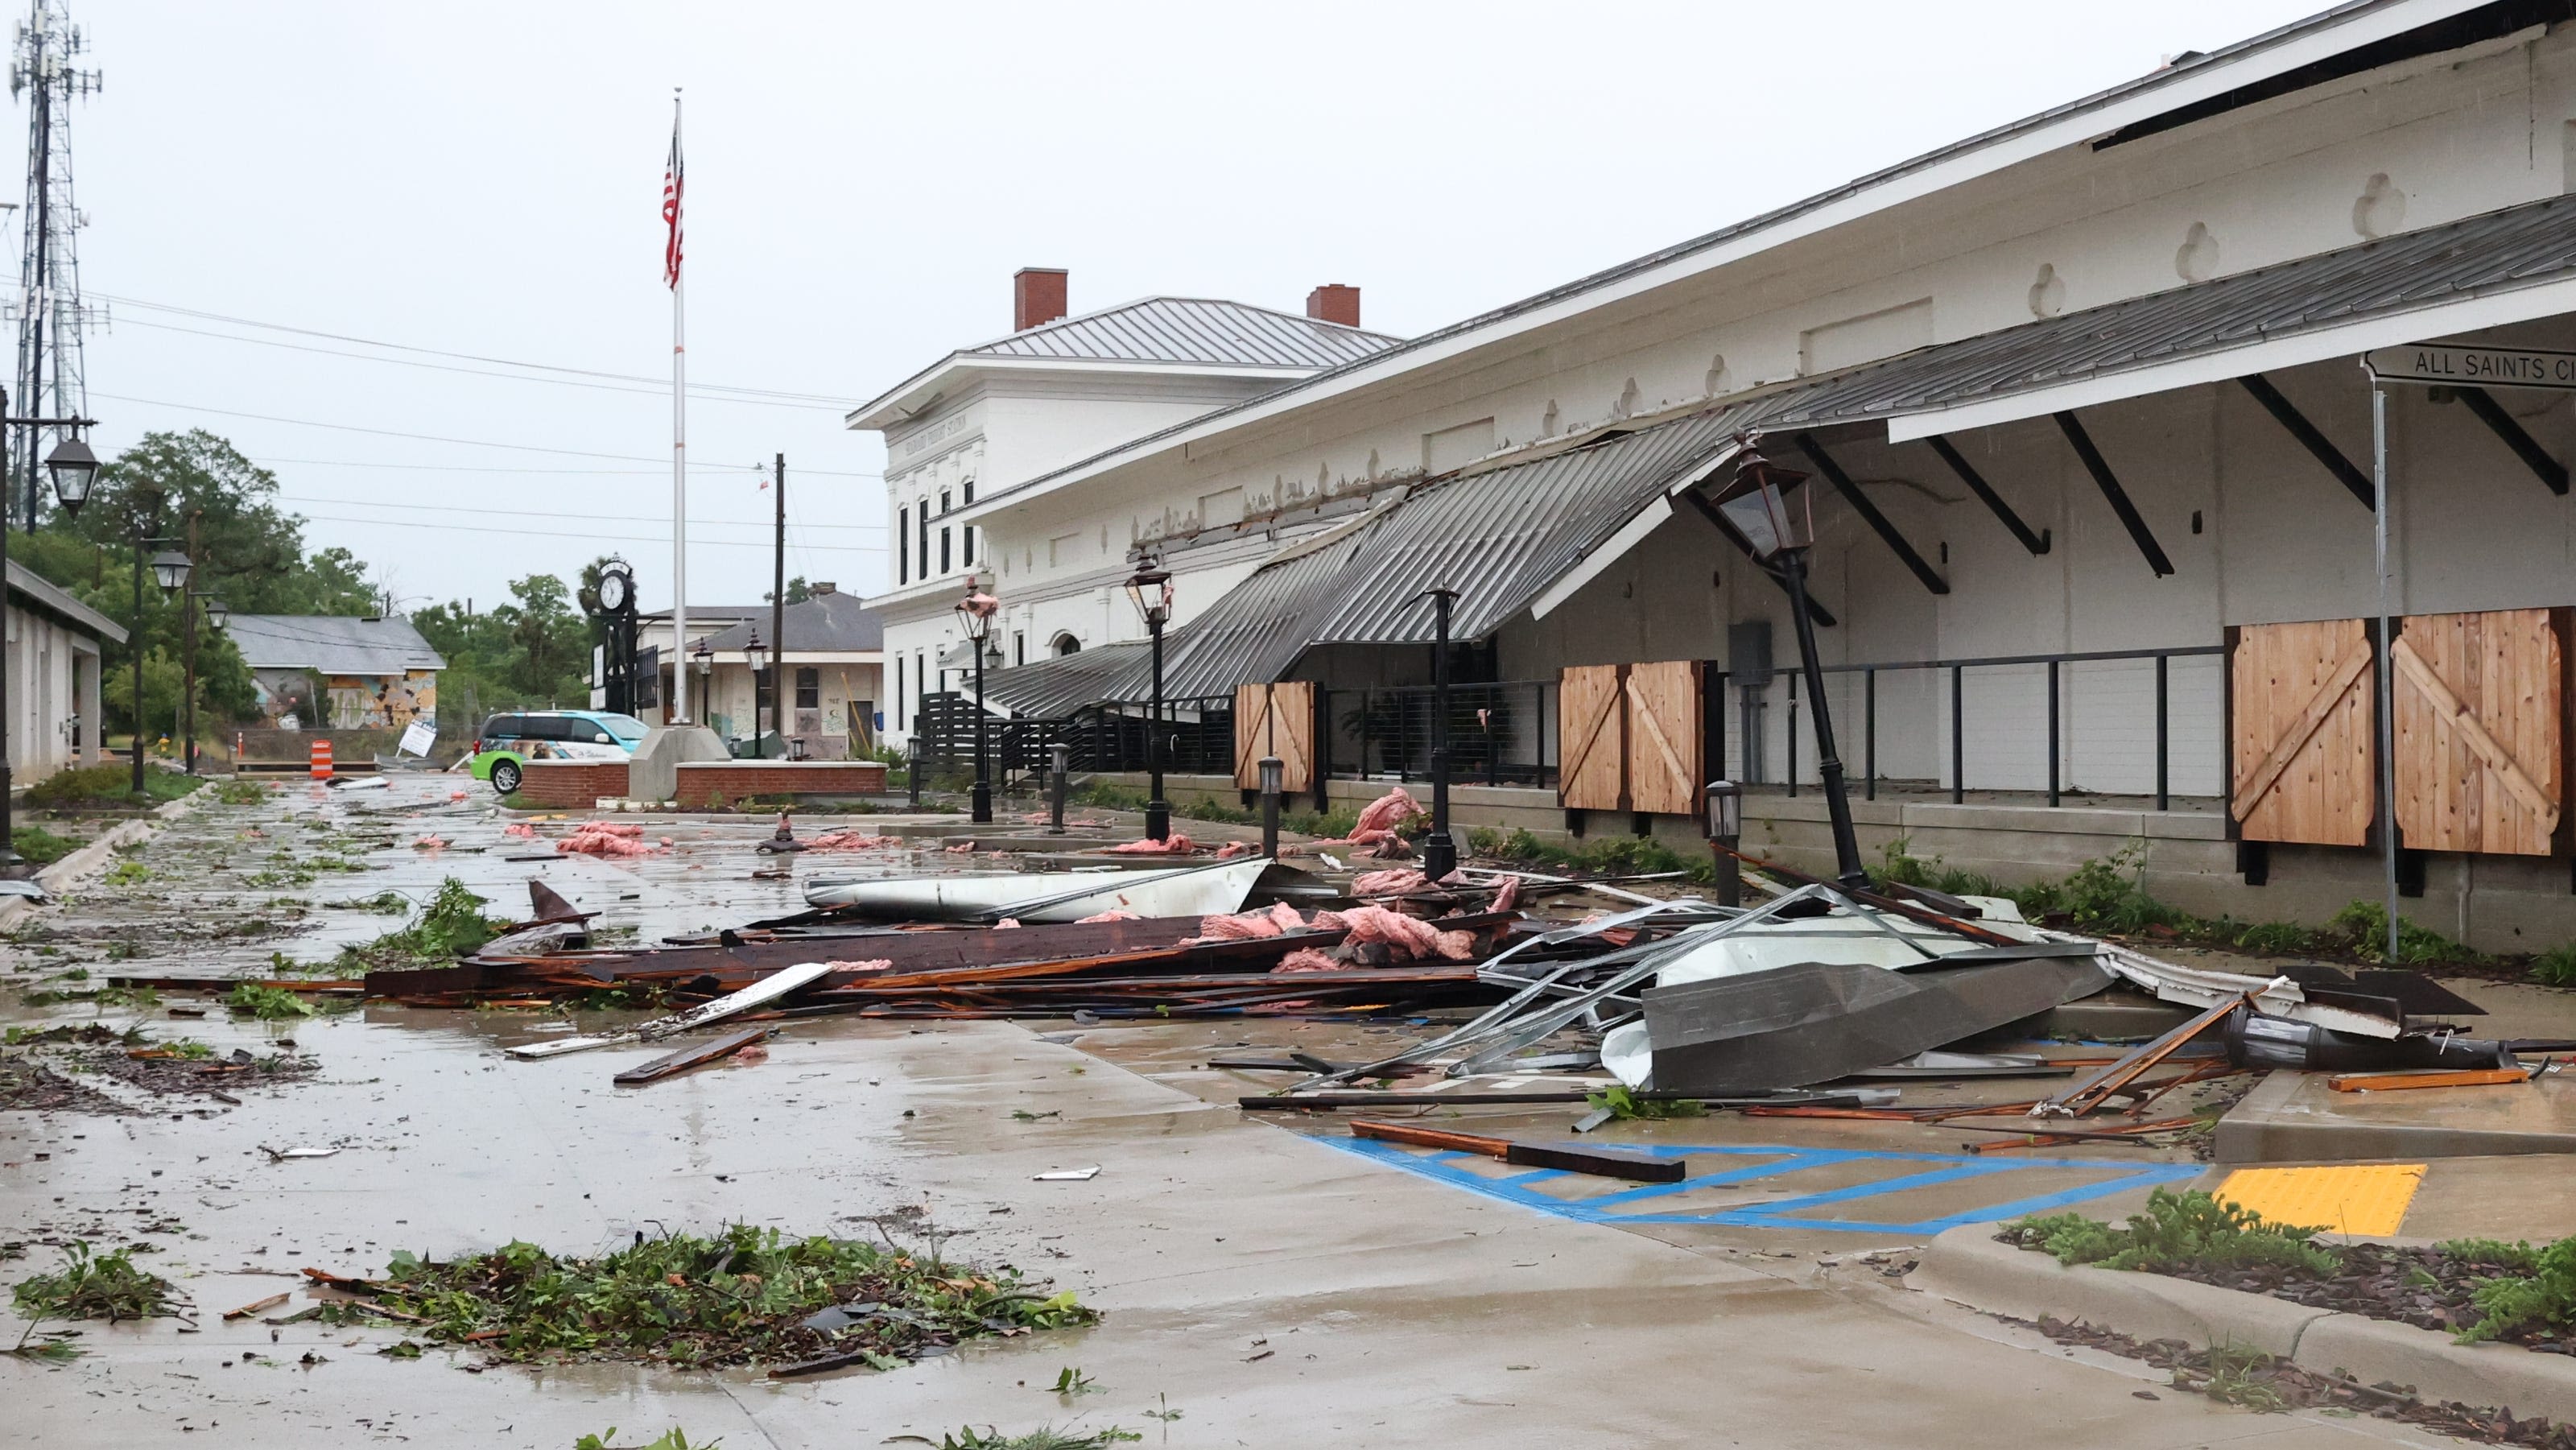 Tallahassee tornado live updates: Woman killed; 80,000 without power amid widespread damage